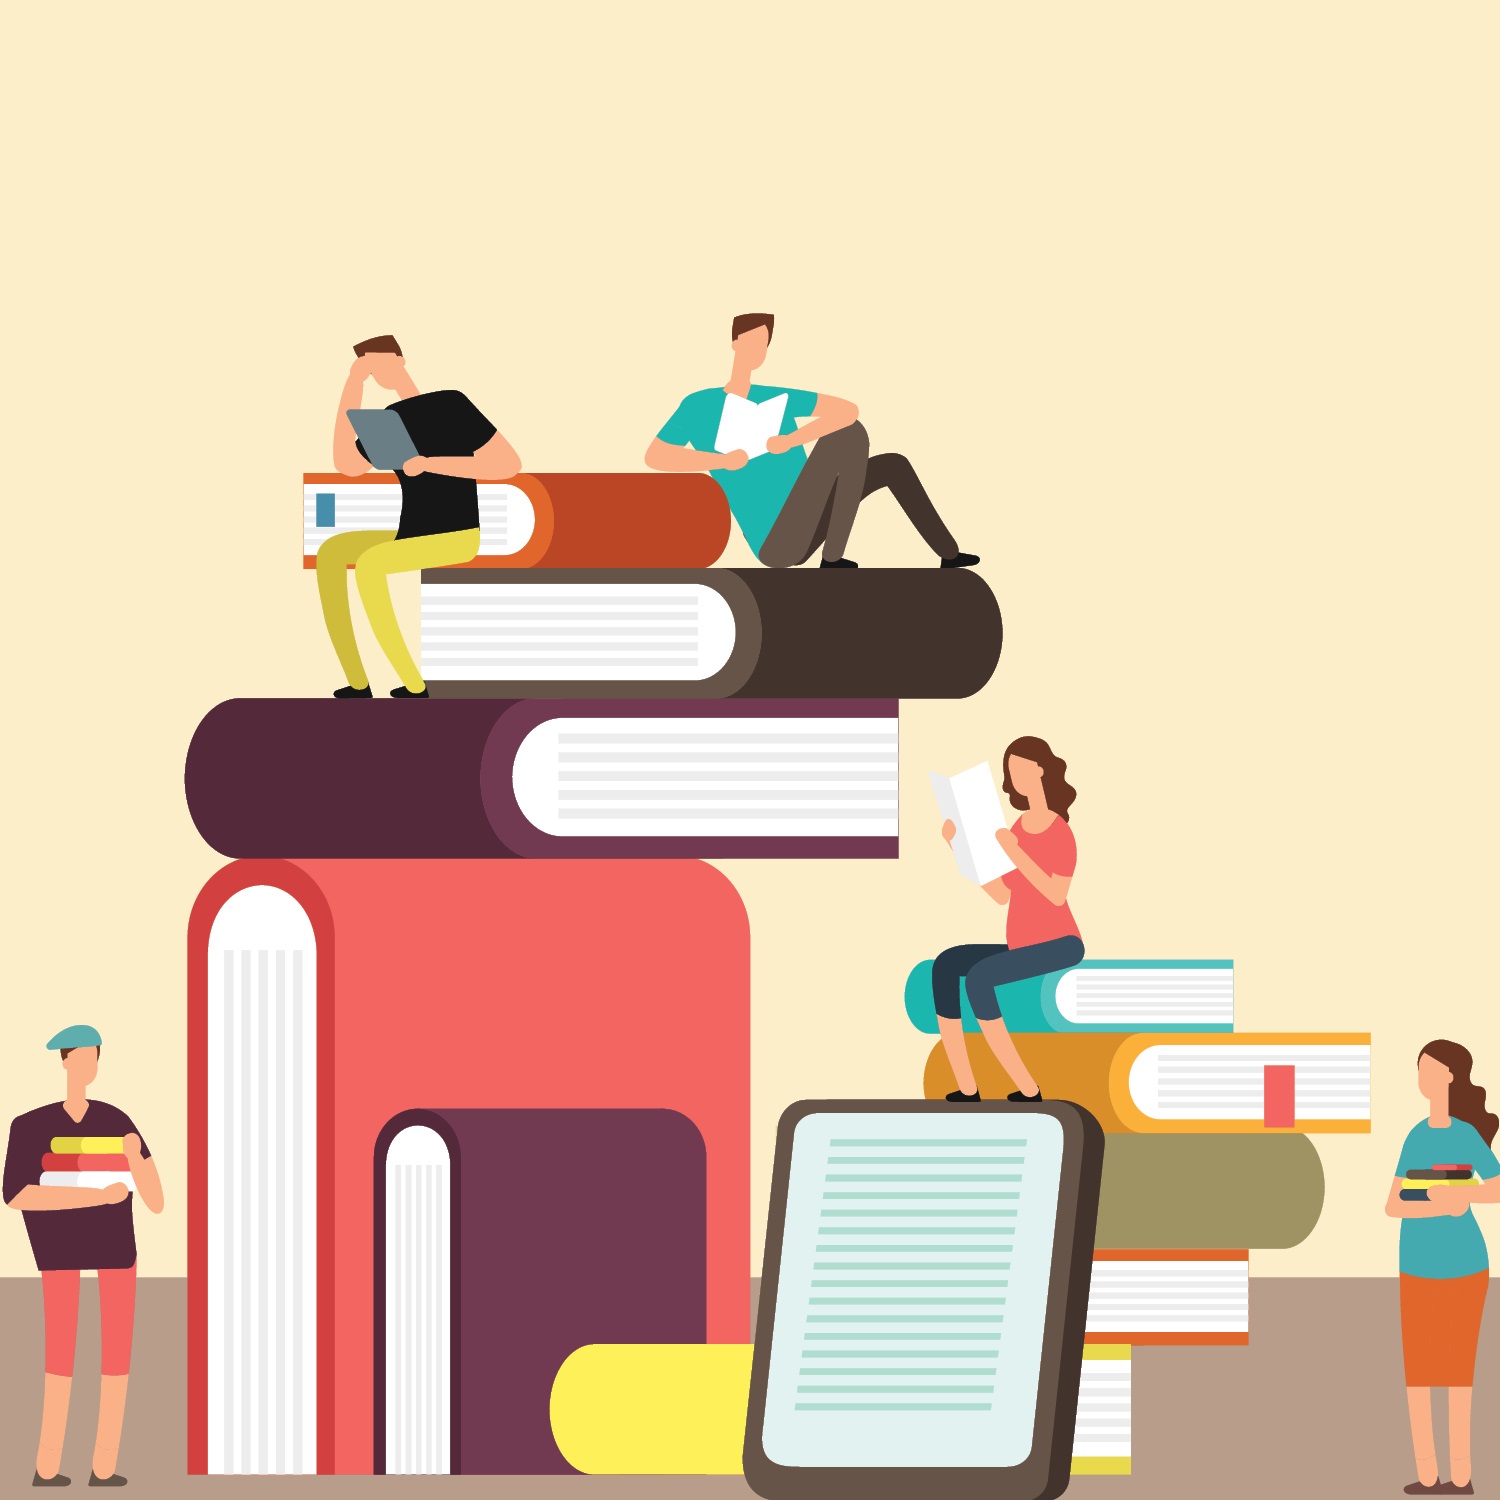 Illustration of five different people reading books in a fictional book world